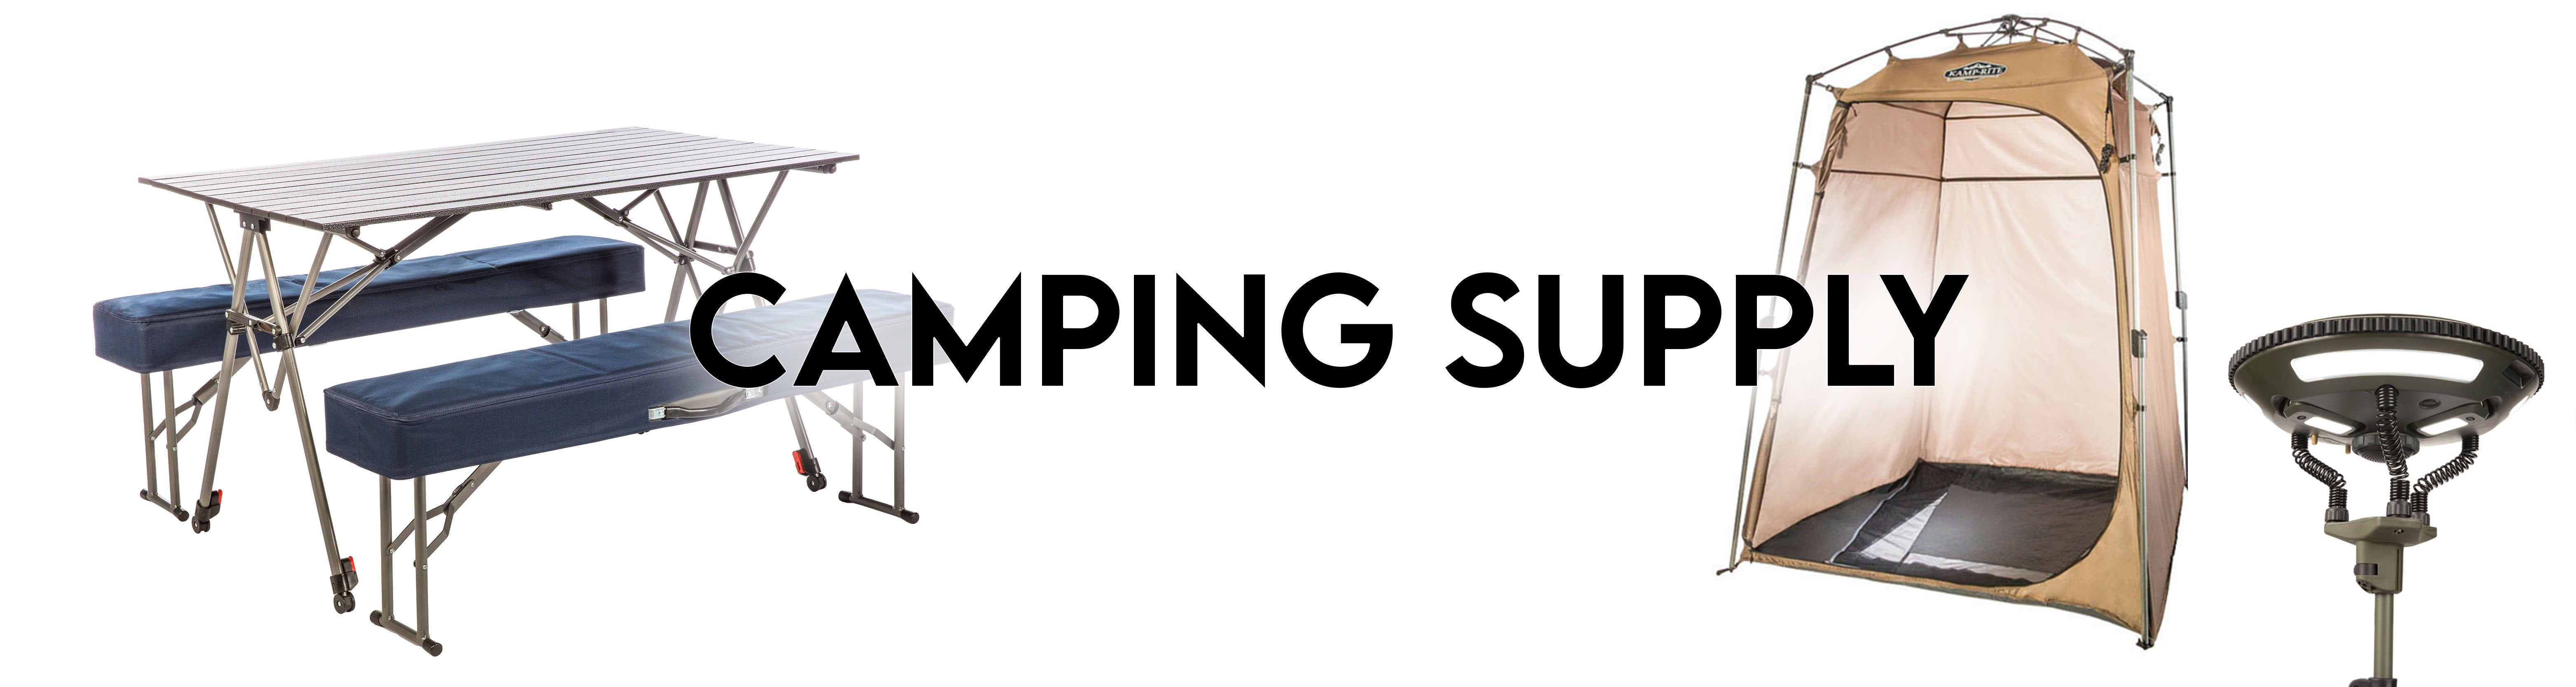 Camping Supply - Recreation Outfitters